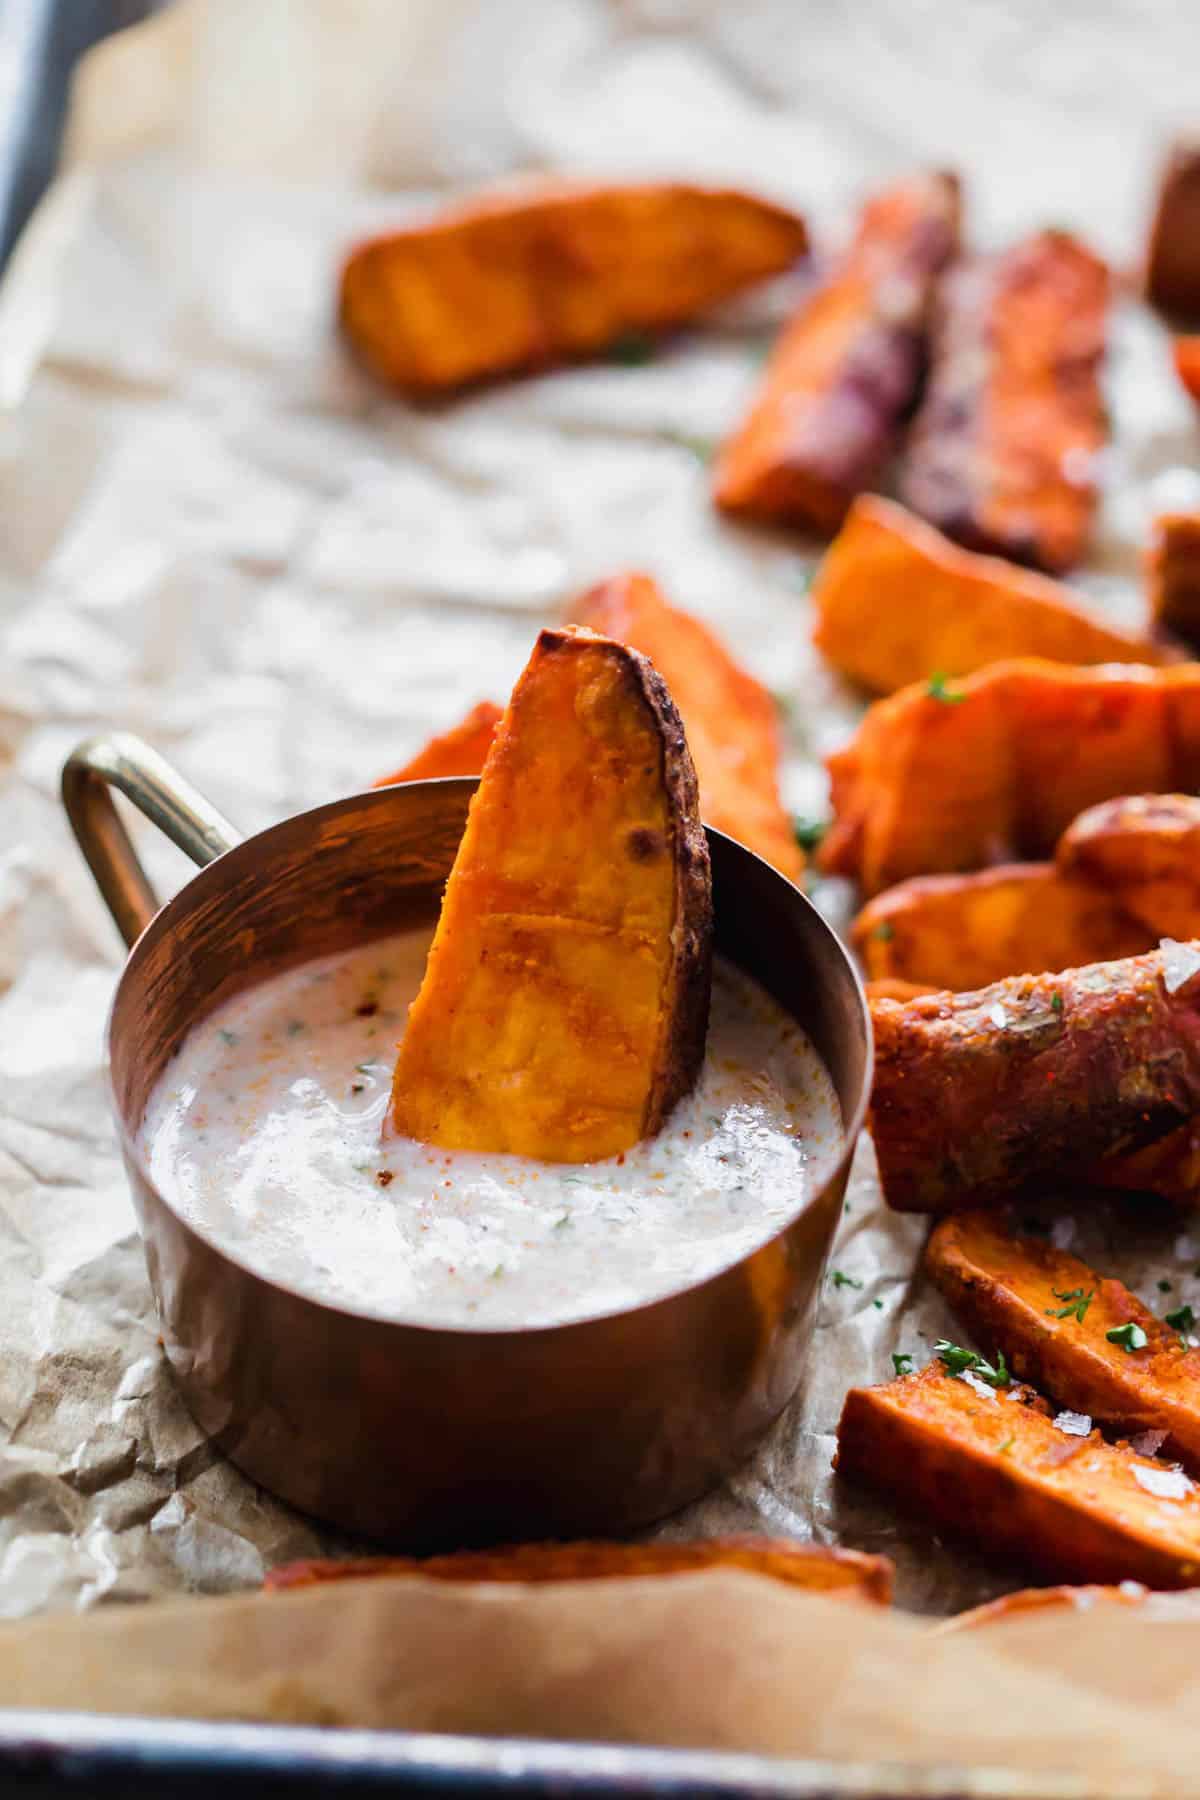 Chilli Lime Sweet Potato Wedges dunked in a dipping sauce